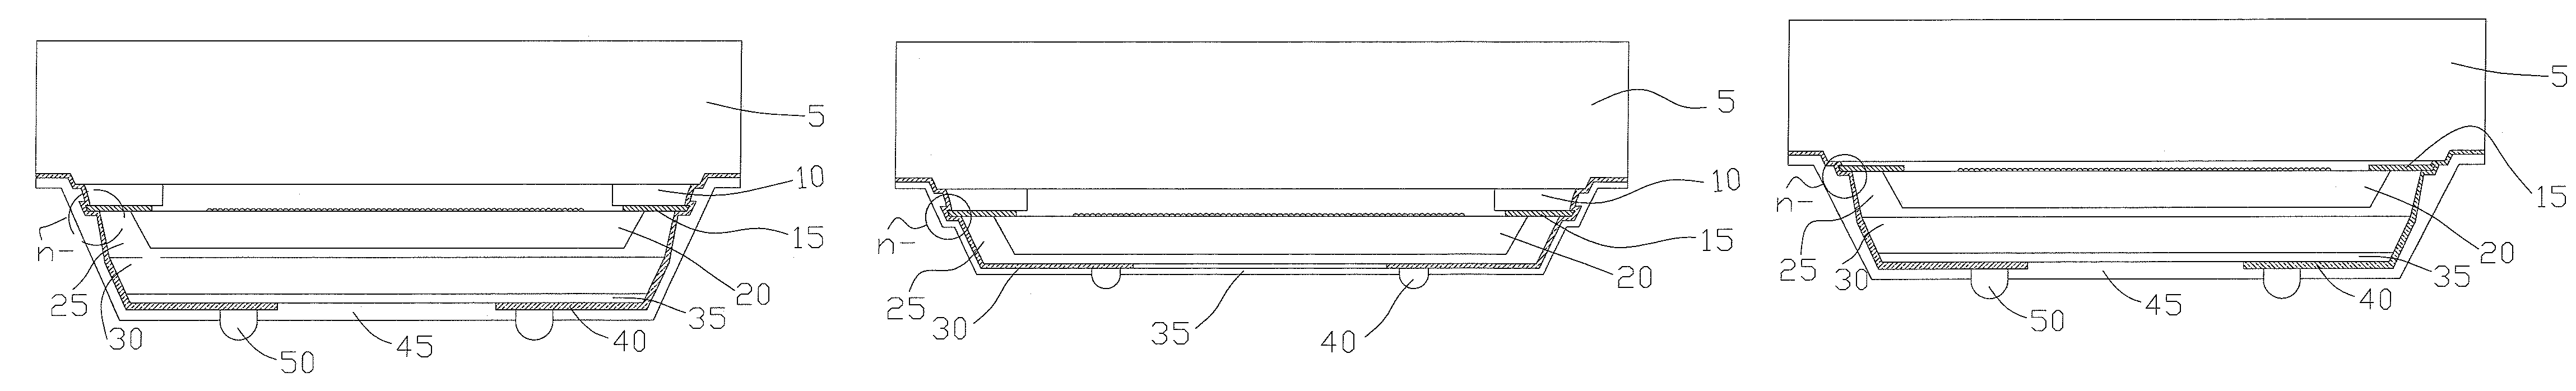 Wafer level chip size packaged chip device with an N-shape junction inside and method of fabricating the same